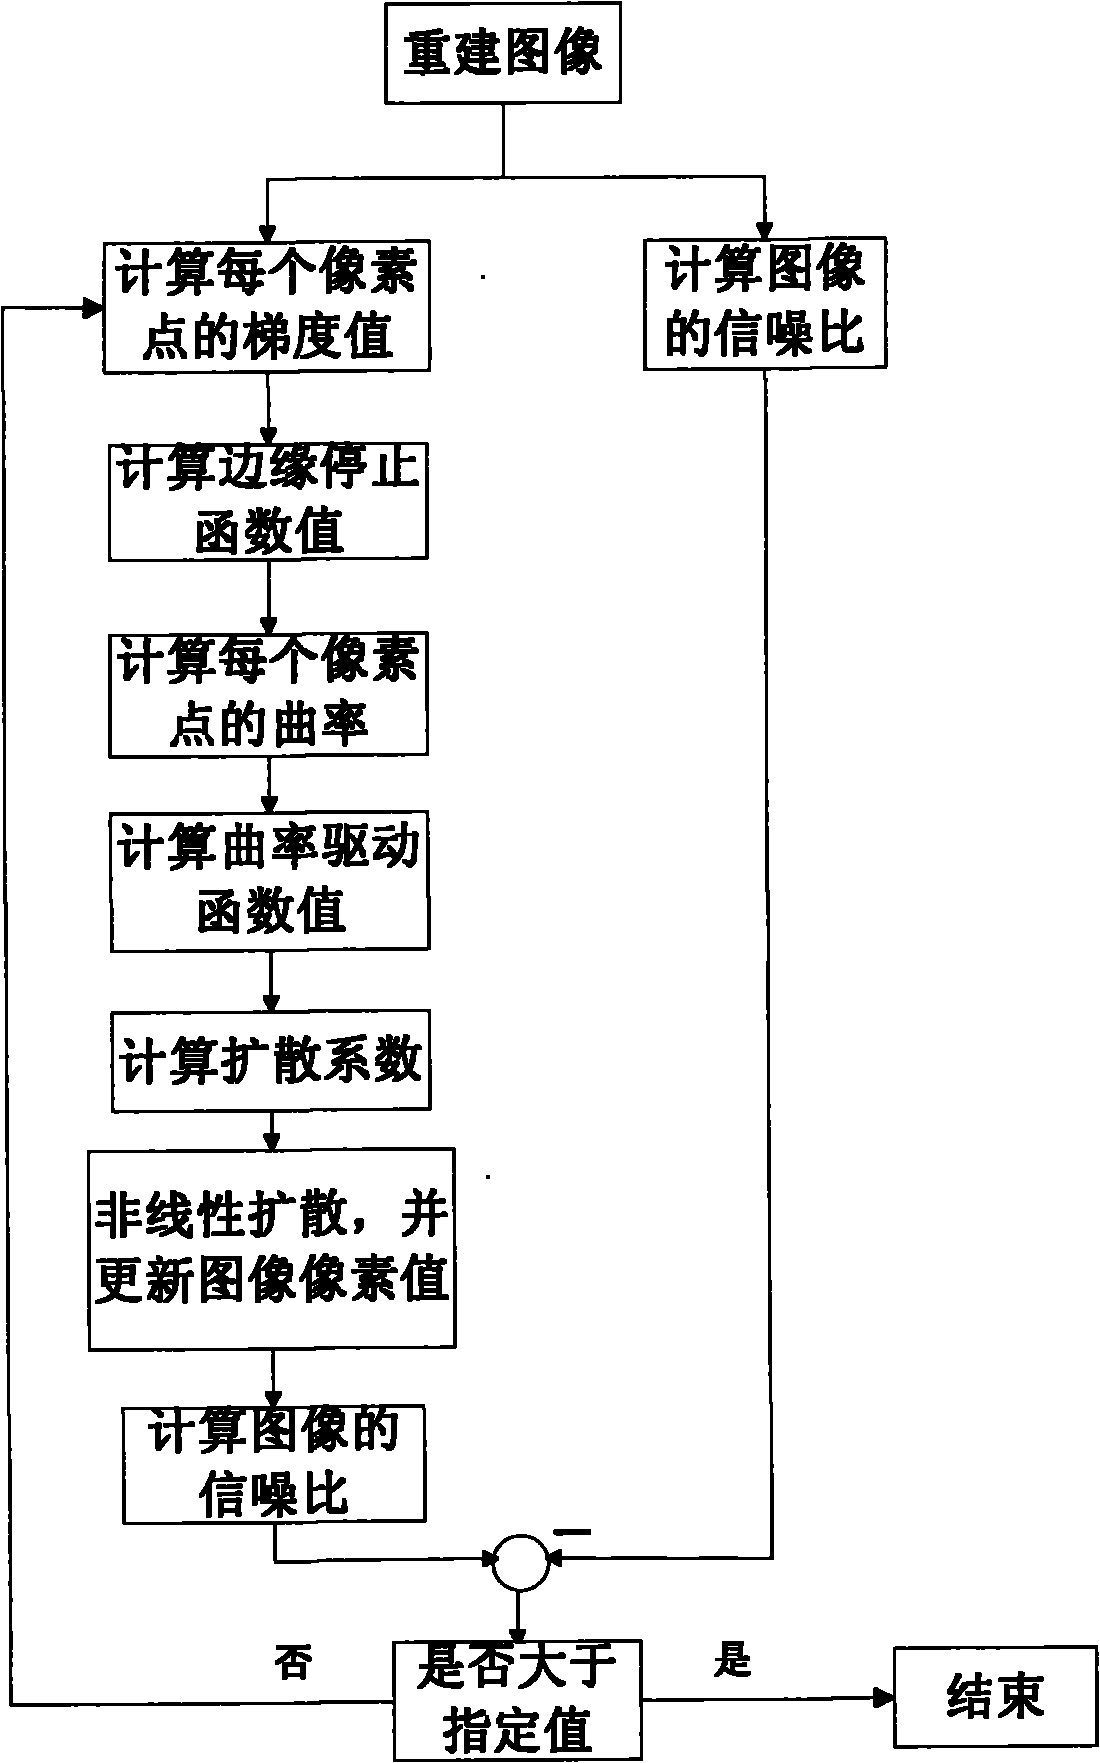 Method for removing block effect of video image